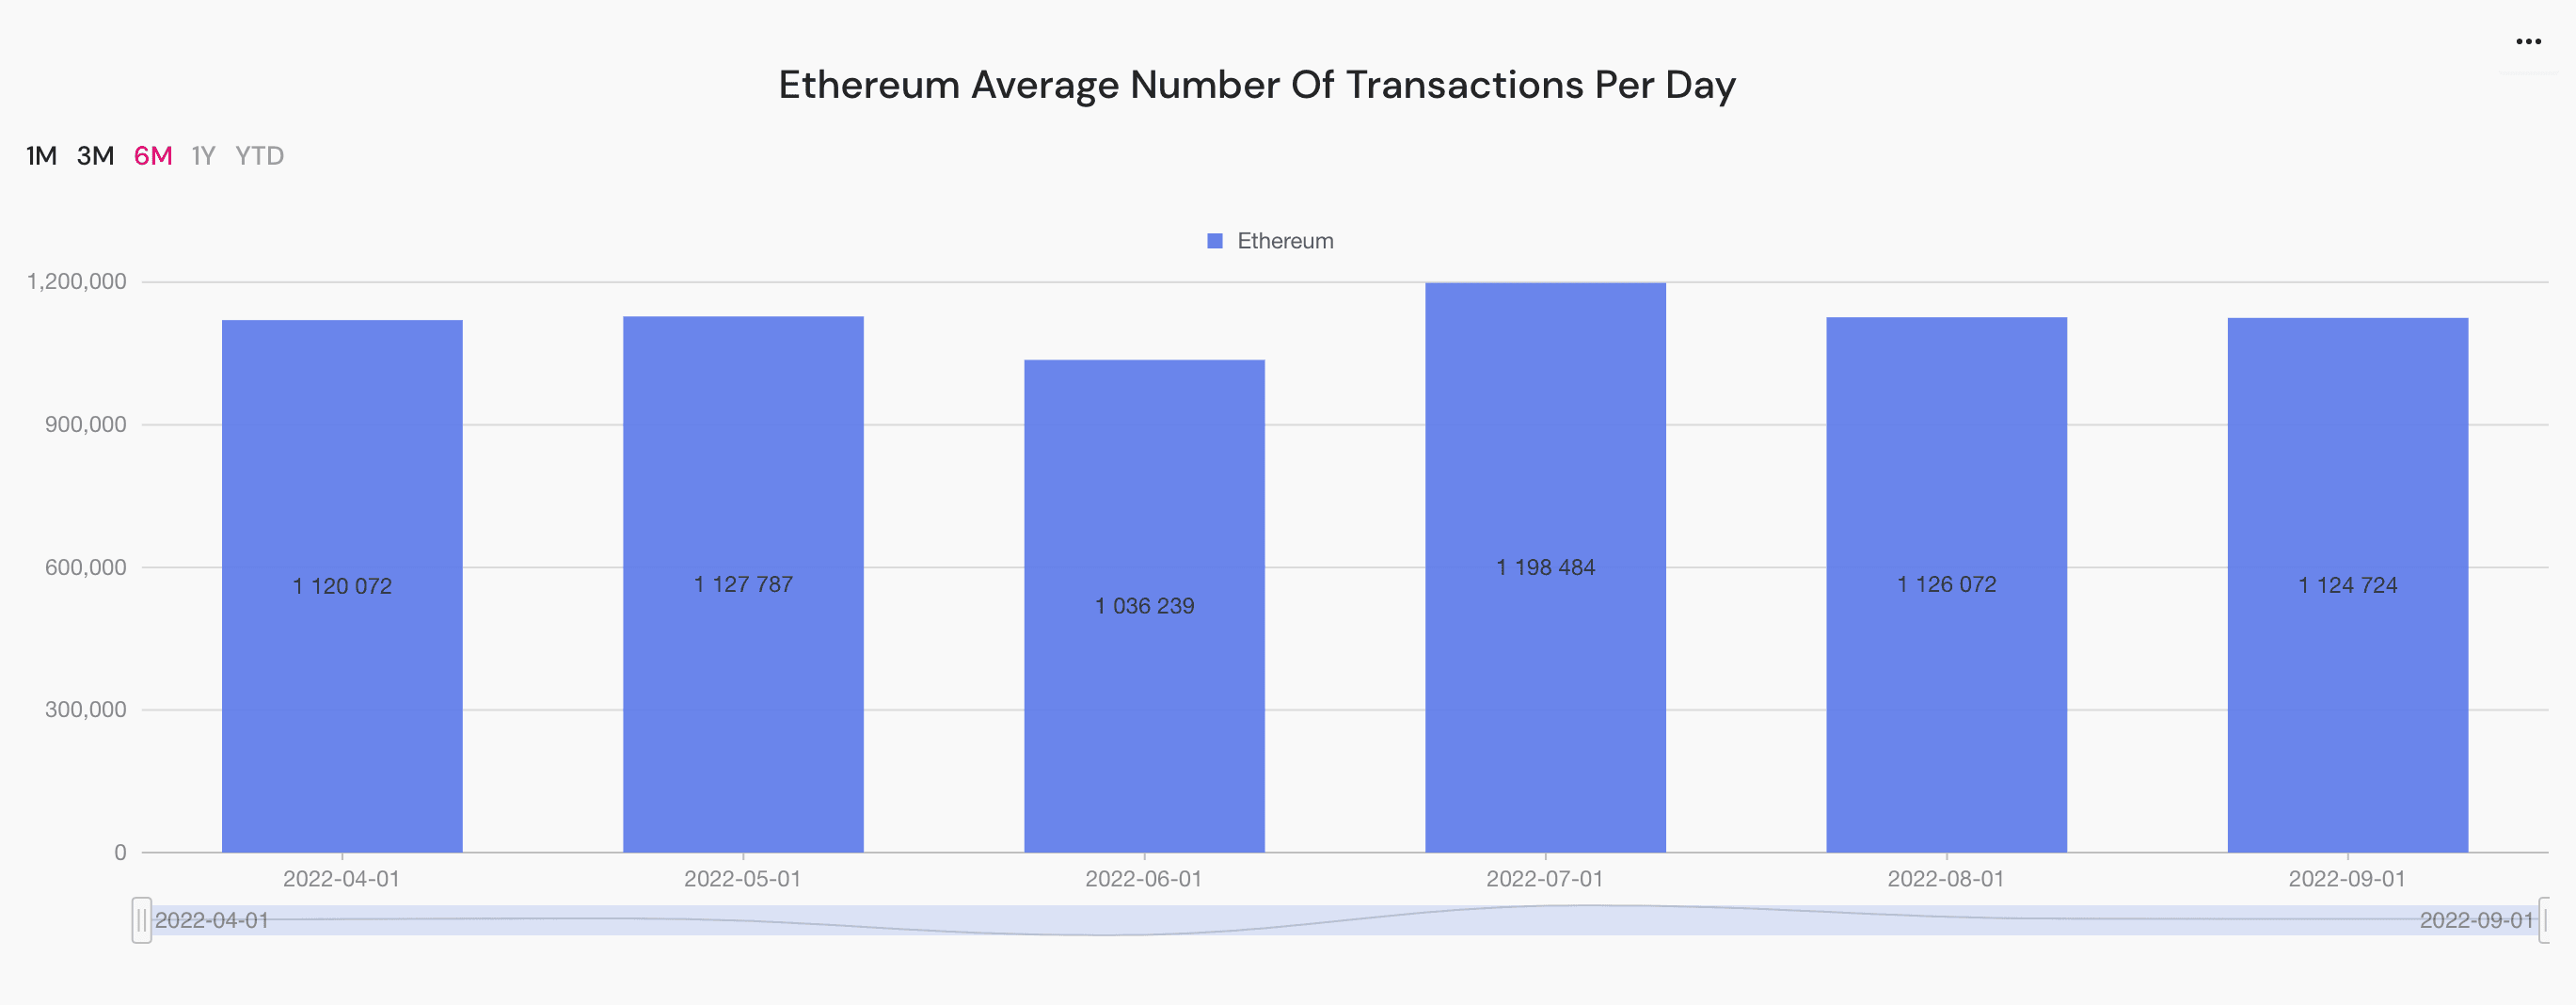 eth average number of transactions per day